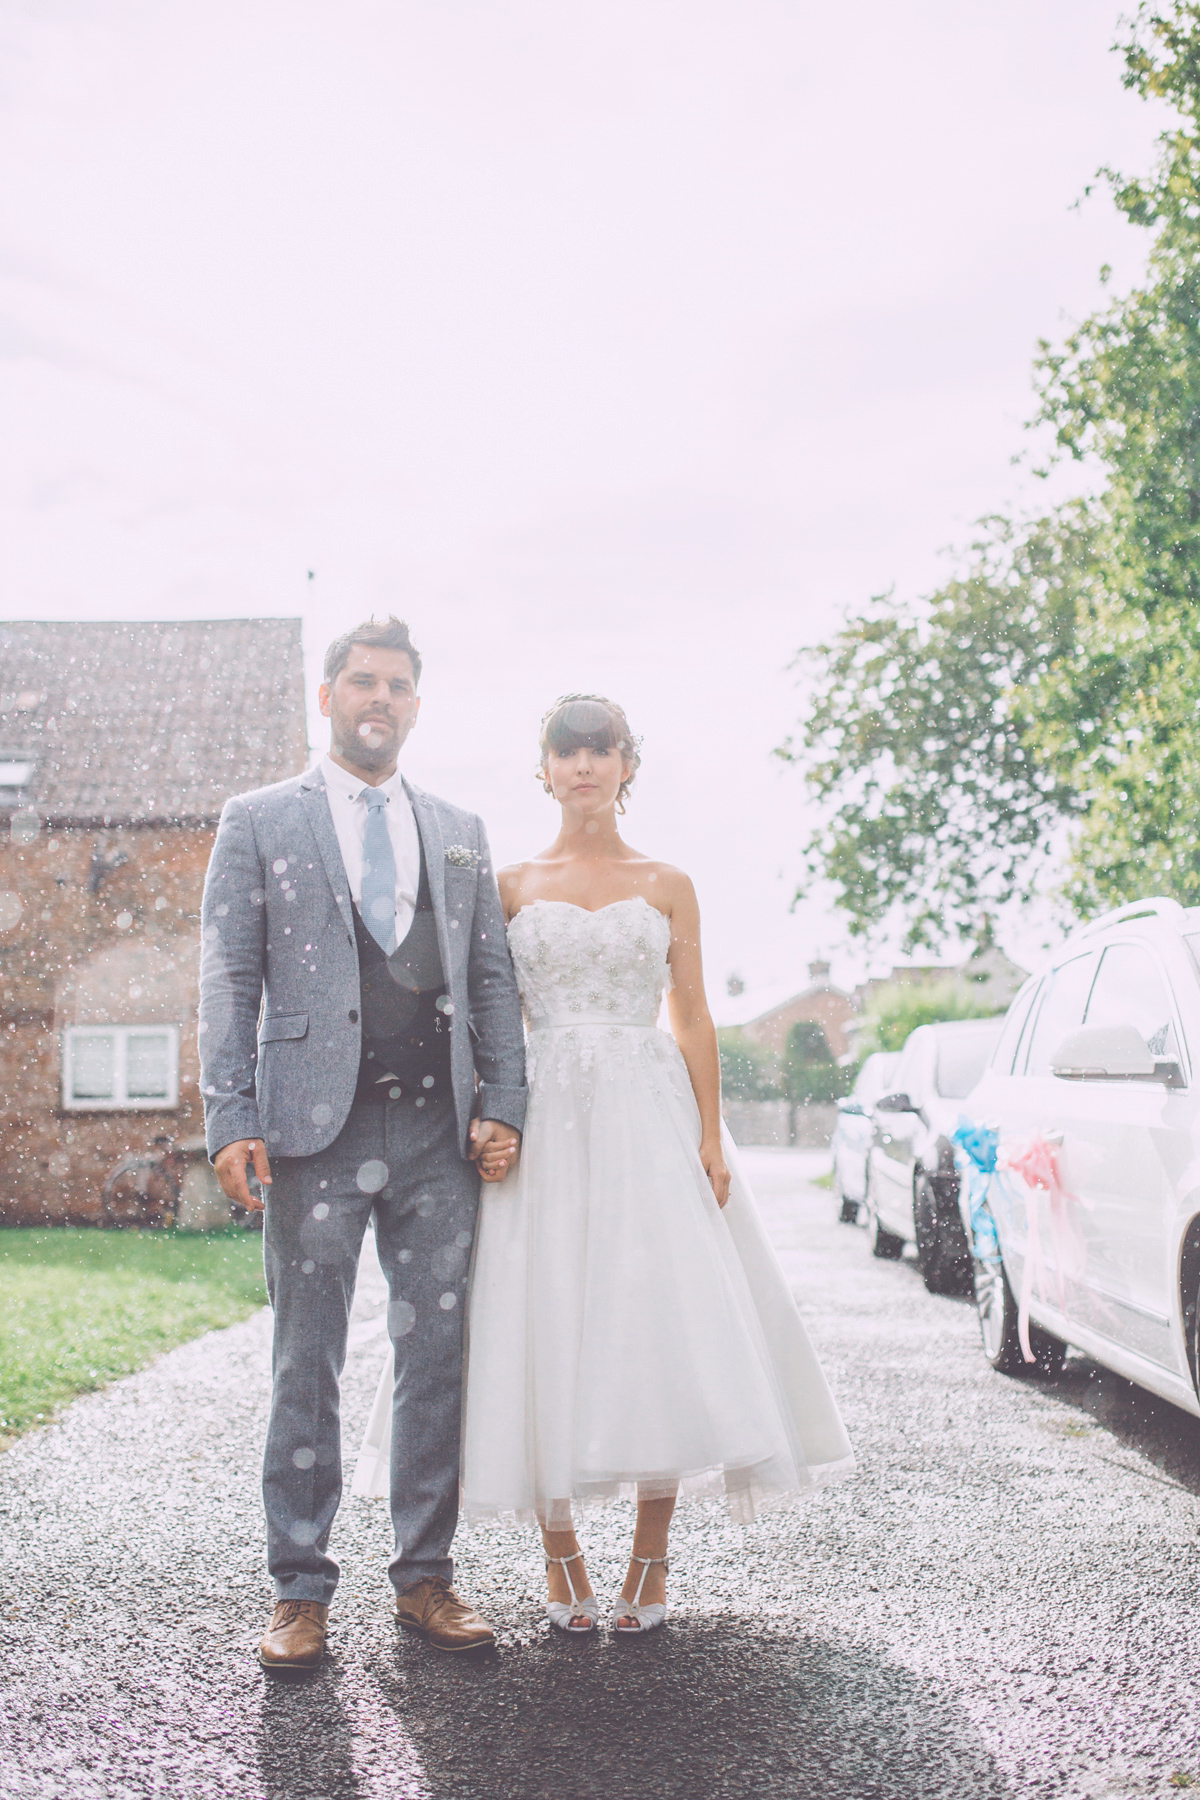 Georgie wore a 1950's inspired Essense of Australia gown for her rustic and rural Somerset barn wedding. Photography by Naomi Jane.